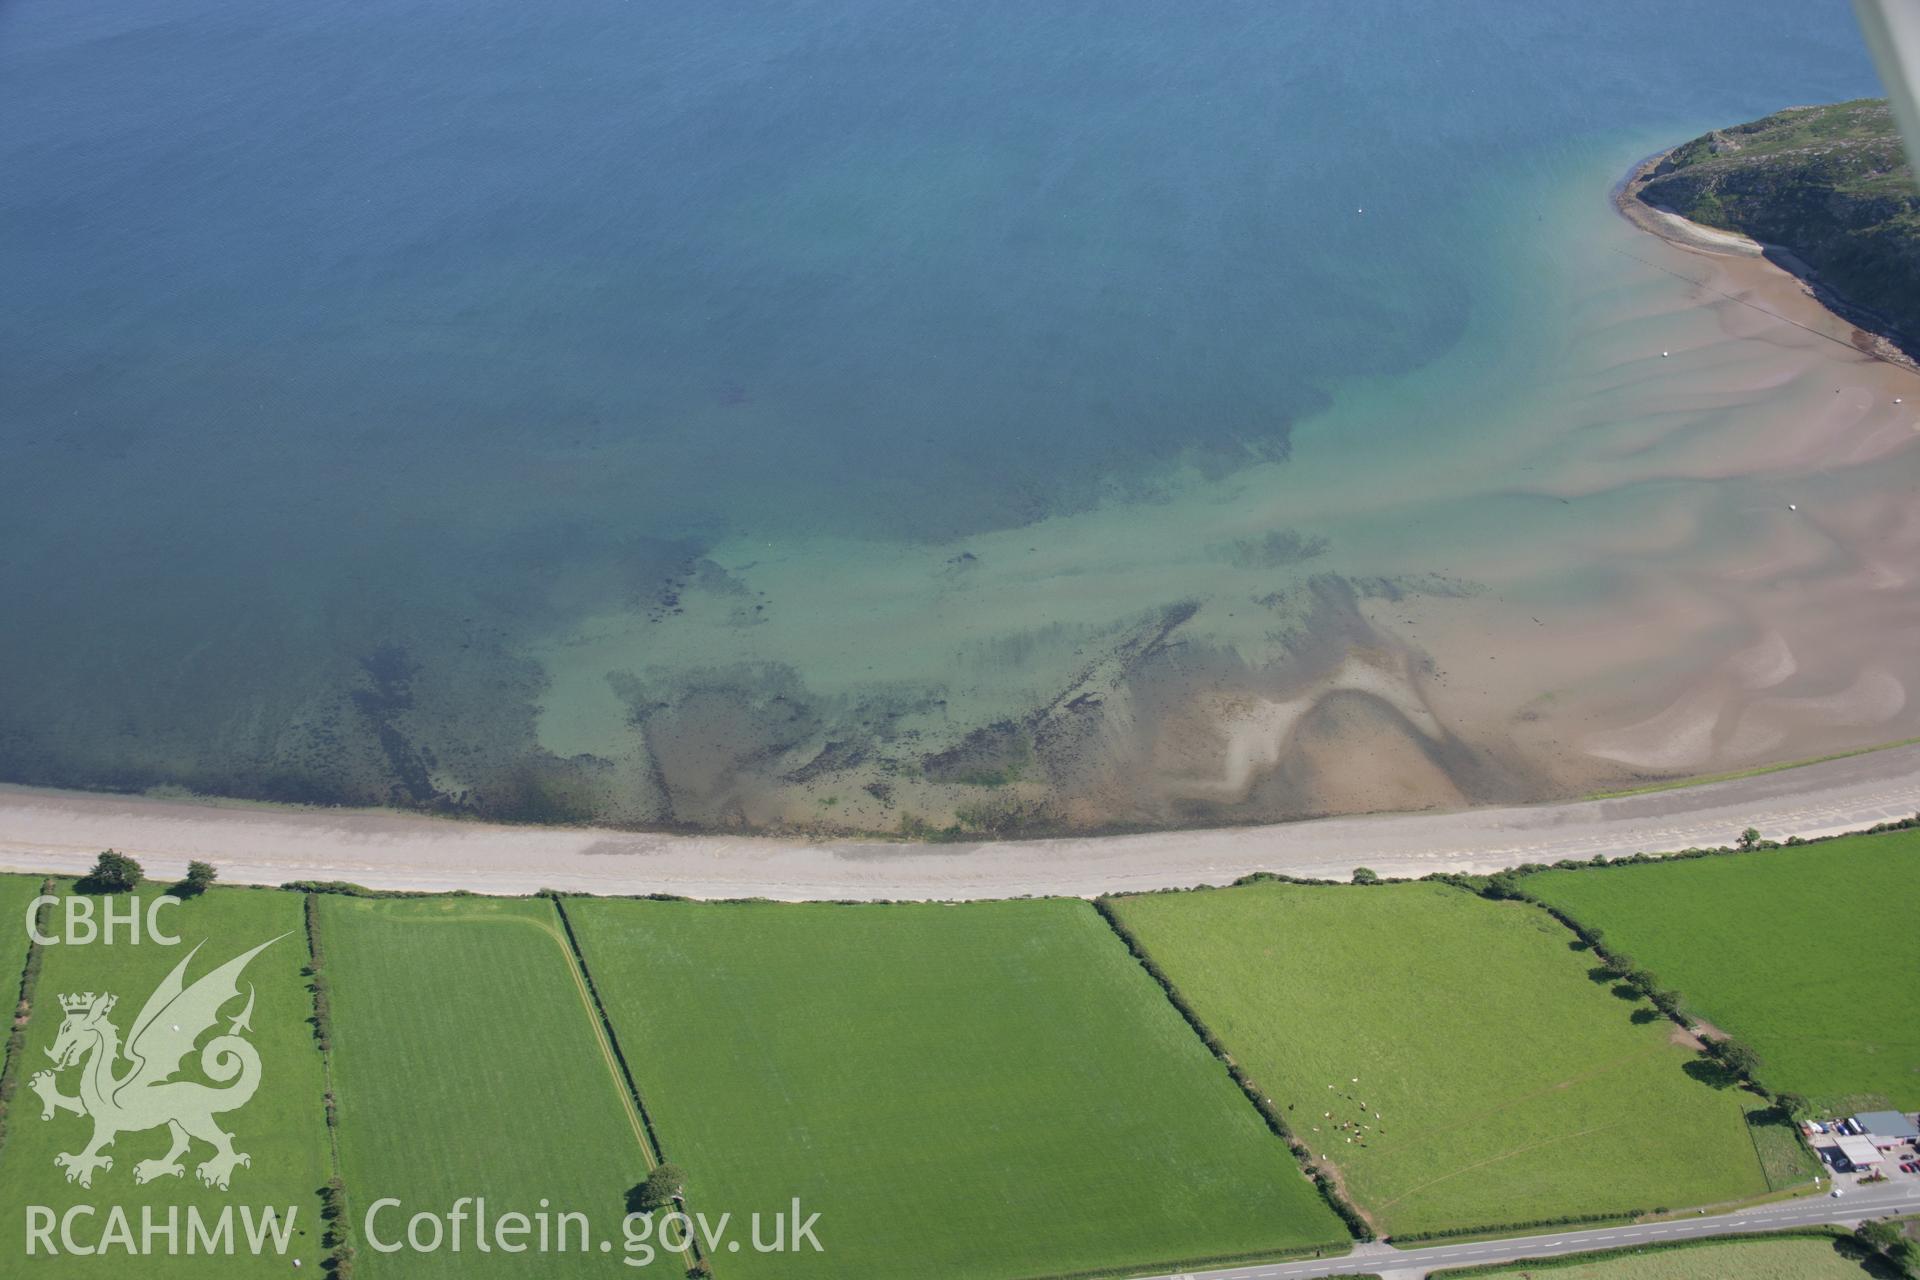 RCAHMW colour oblique aerial photograph of Carreg y Defaid Submerged Structures from the north-west. Taken on 14 June 2006 by Toby Driver.